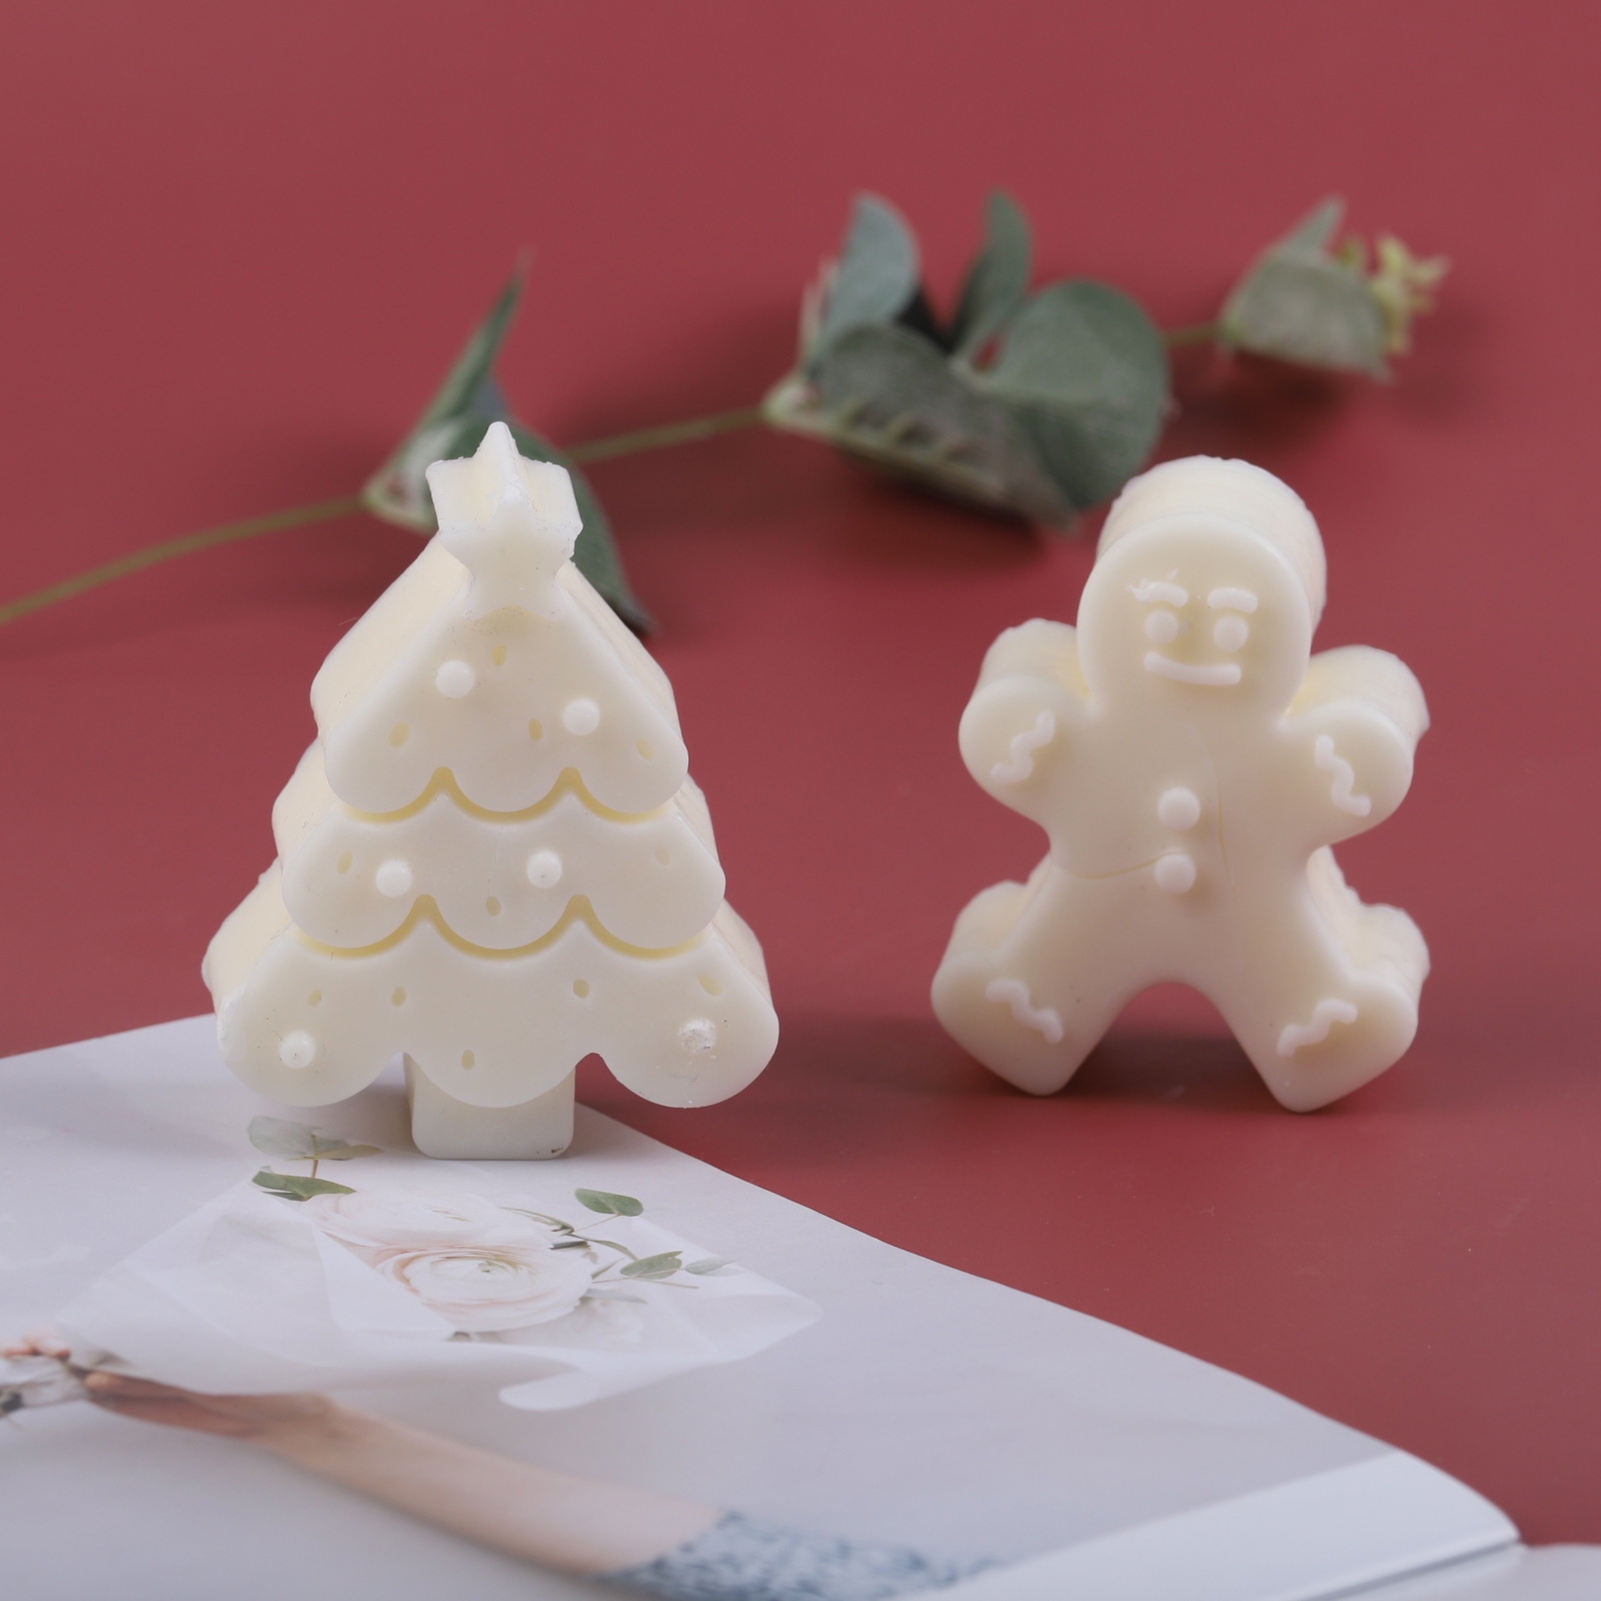 Christmas Tree Shape Chocolate Baking Set 3D Snowman Elk Candy Cane Biscuit  Jelly Silicone Mould Ice Tray Soap Candle Decor Gift